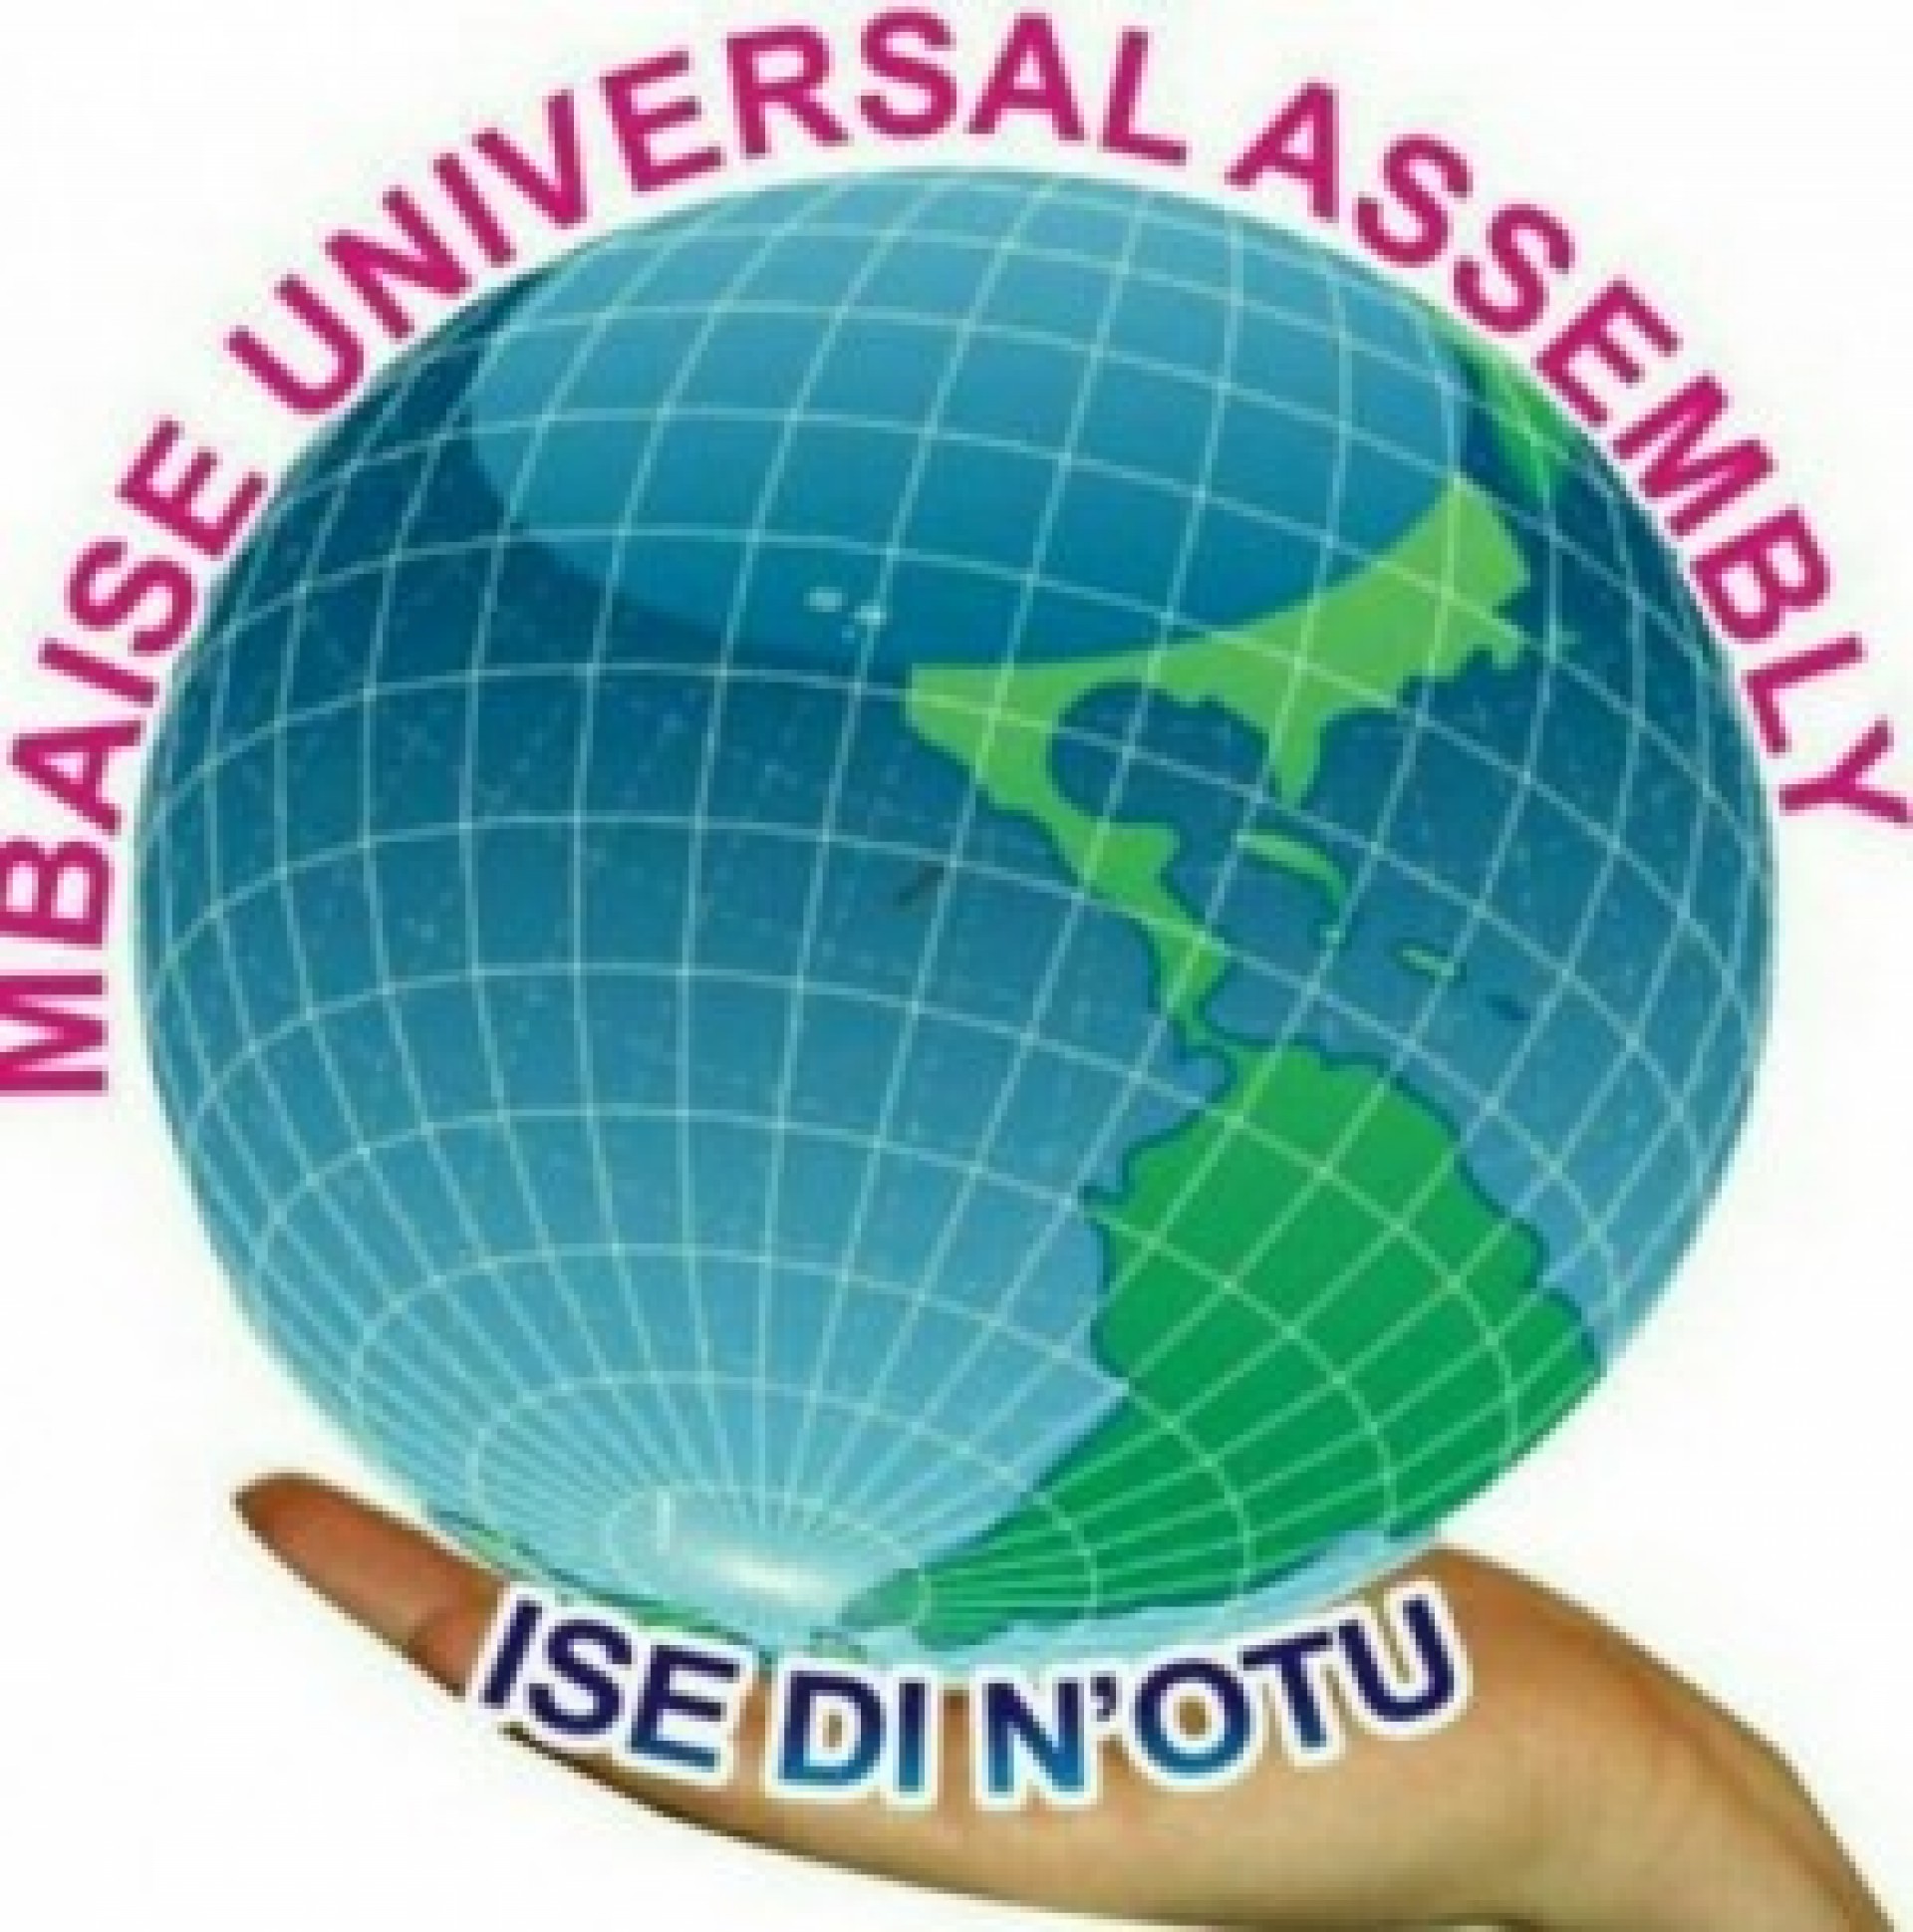 Mbaise Universal Assembly